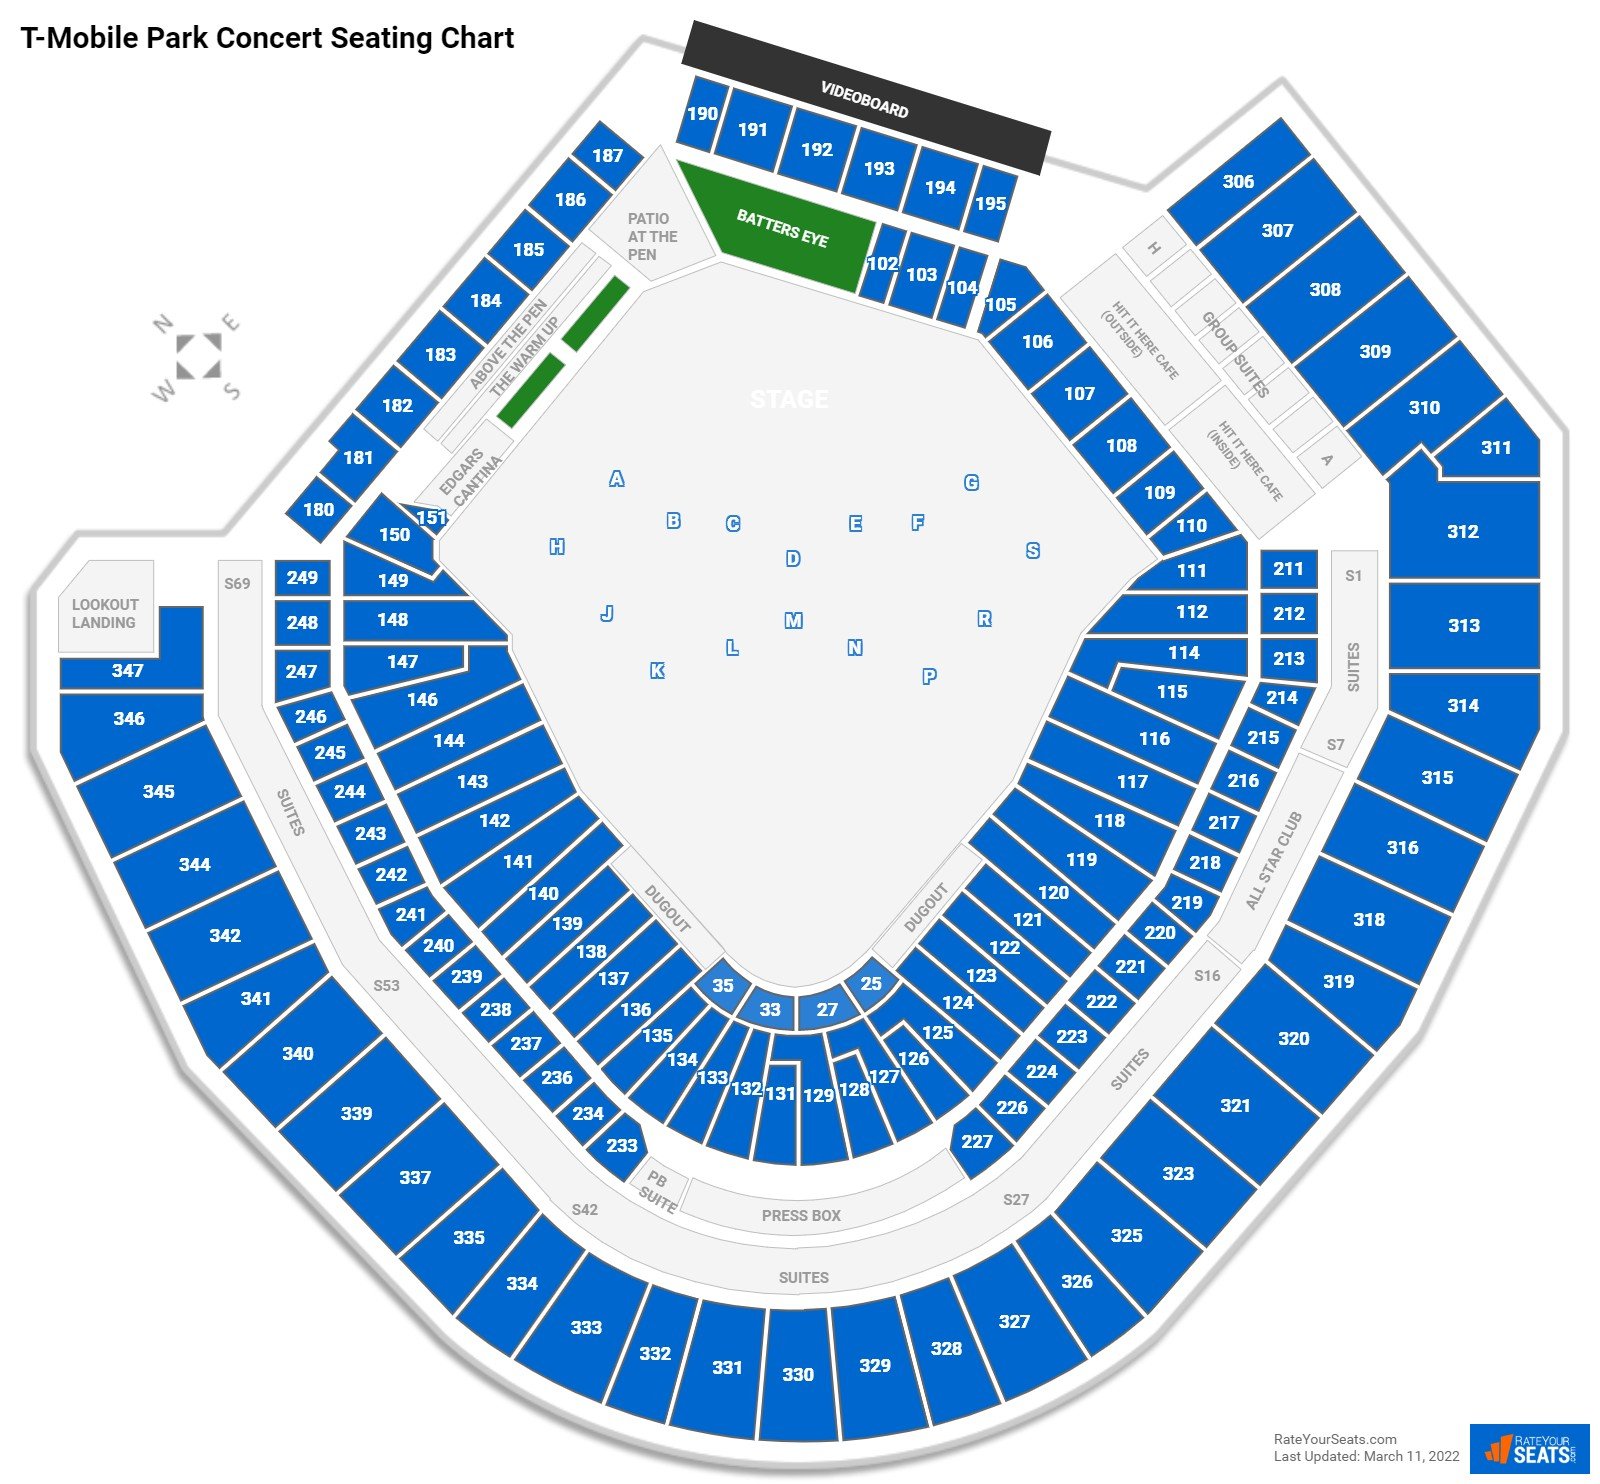 T-Mobile Park Concert Seating Chart